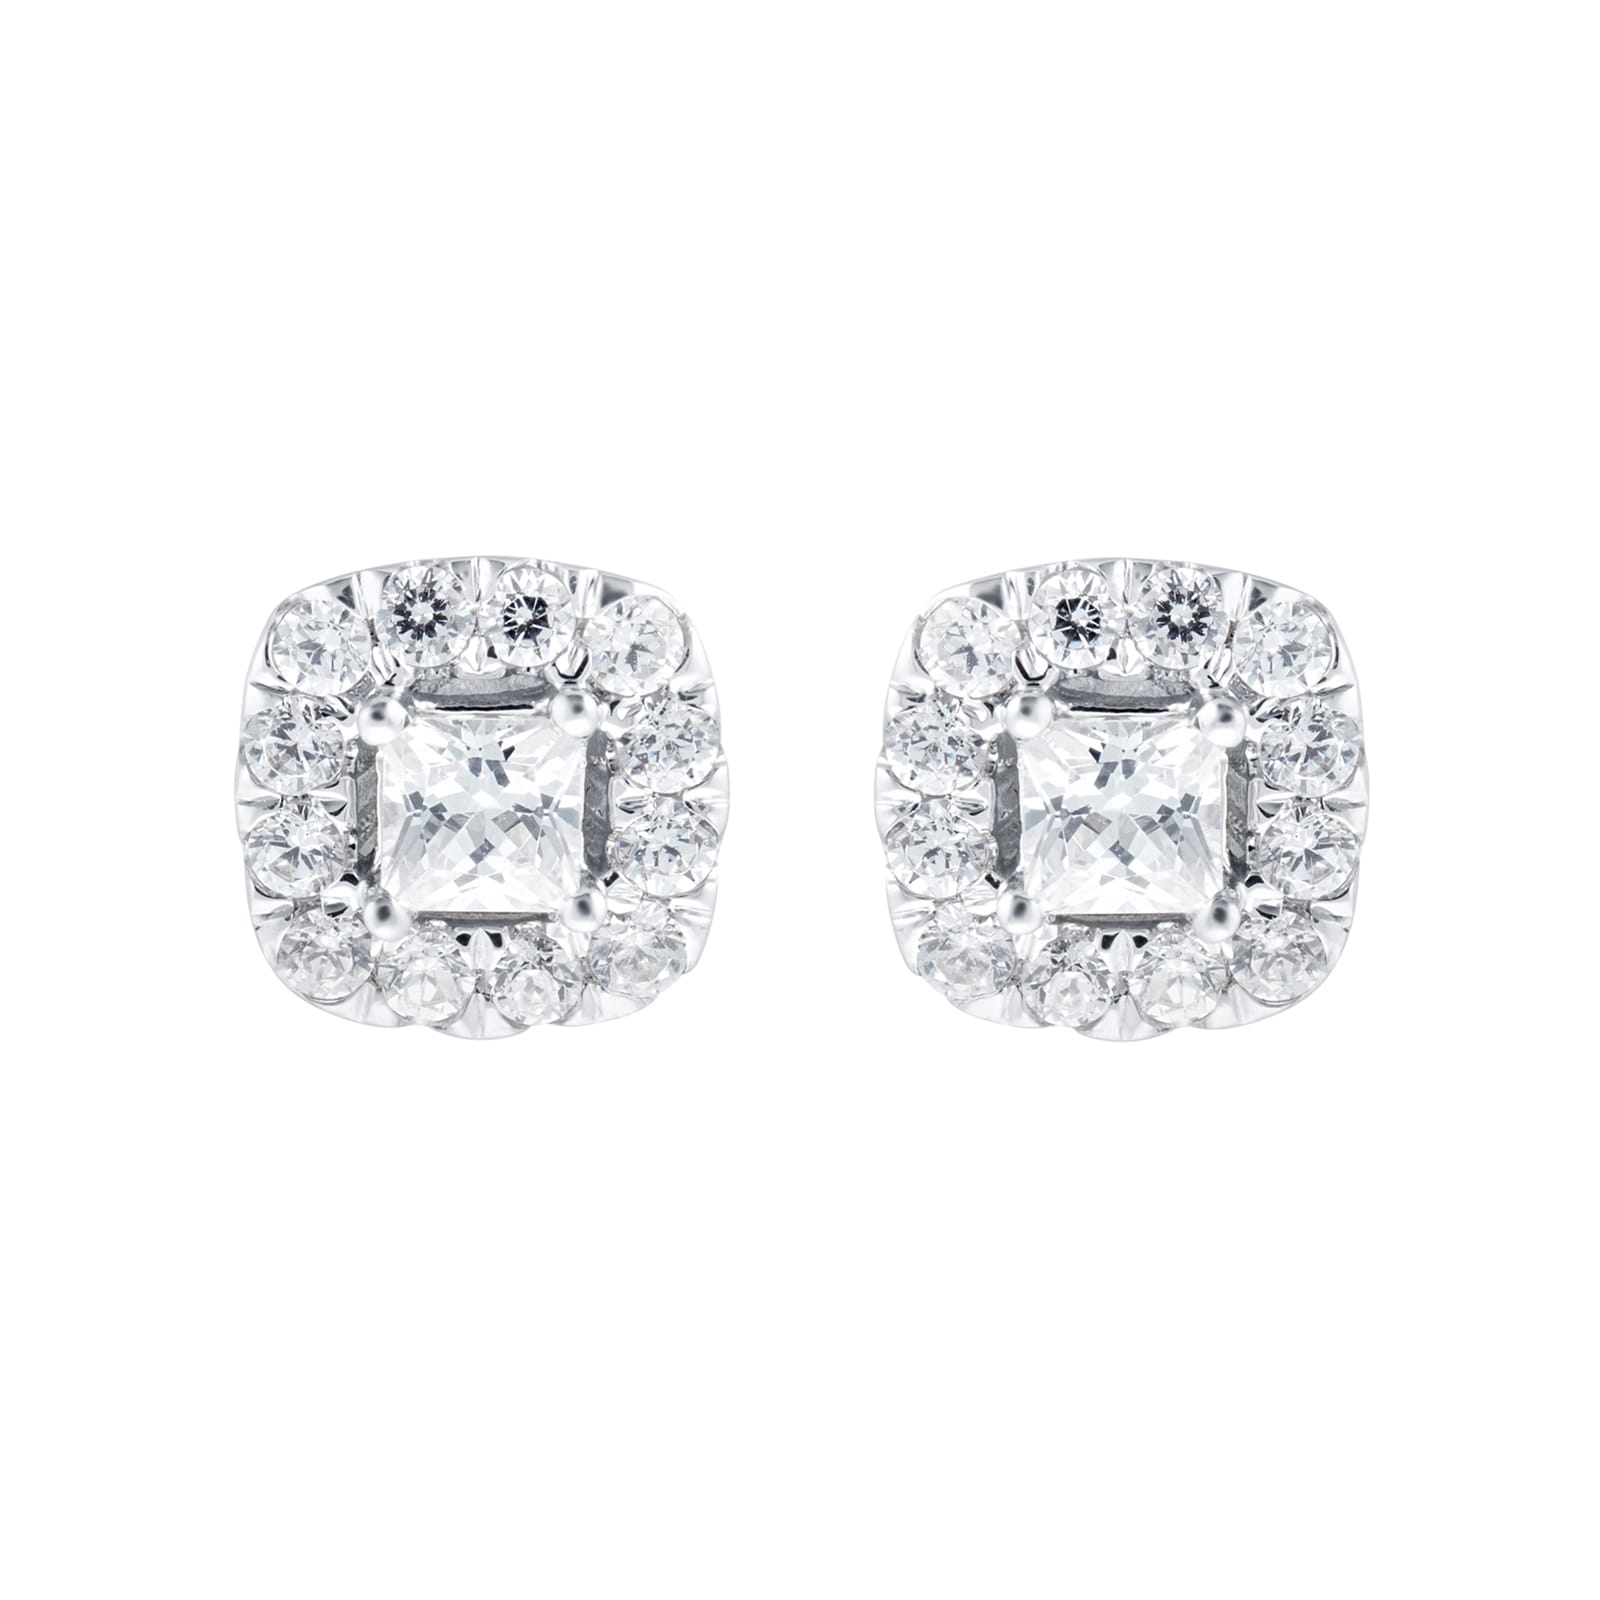 9ct White Gold 0.50cttw Princess Halo Stud Earrings